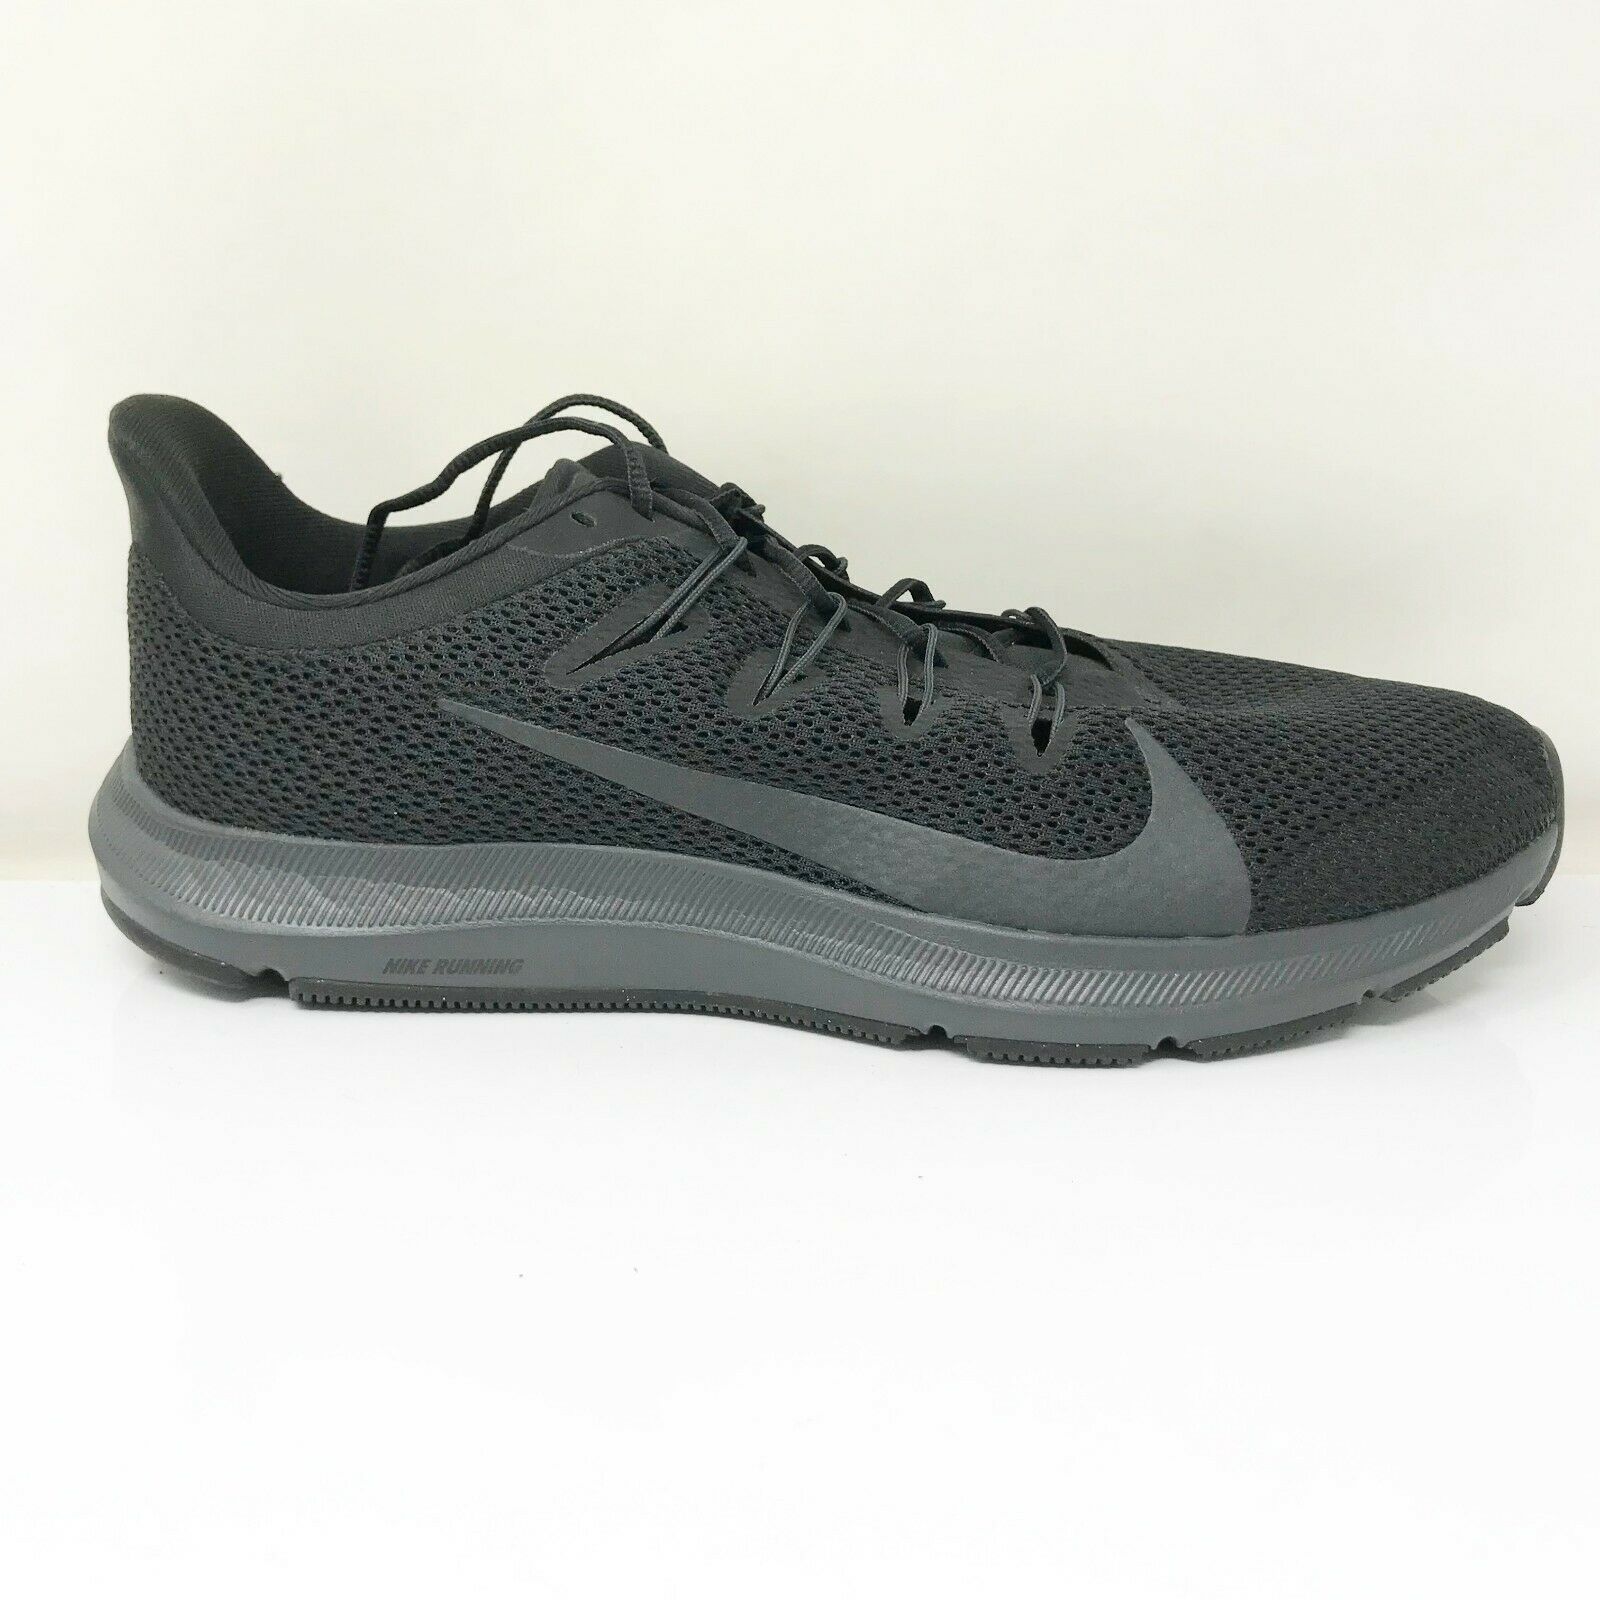 Nike Mens Quest 2 CI3801-003 Black Running Shoes Sneakers Size 11.5